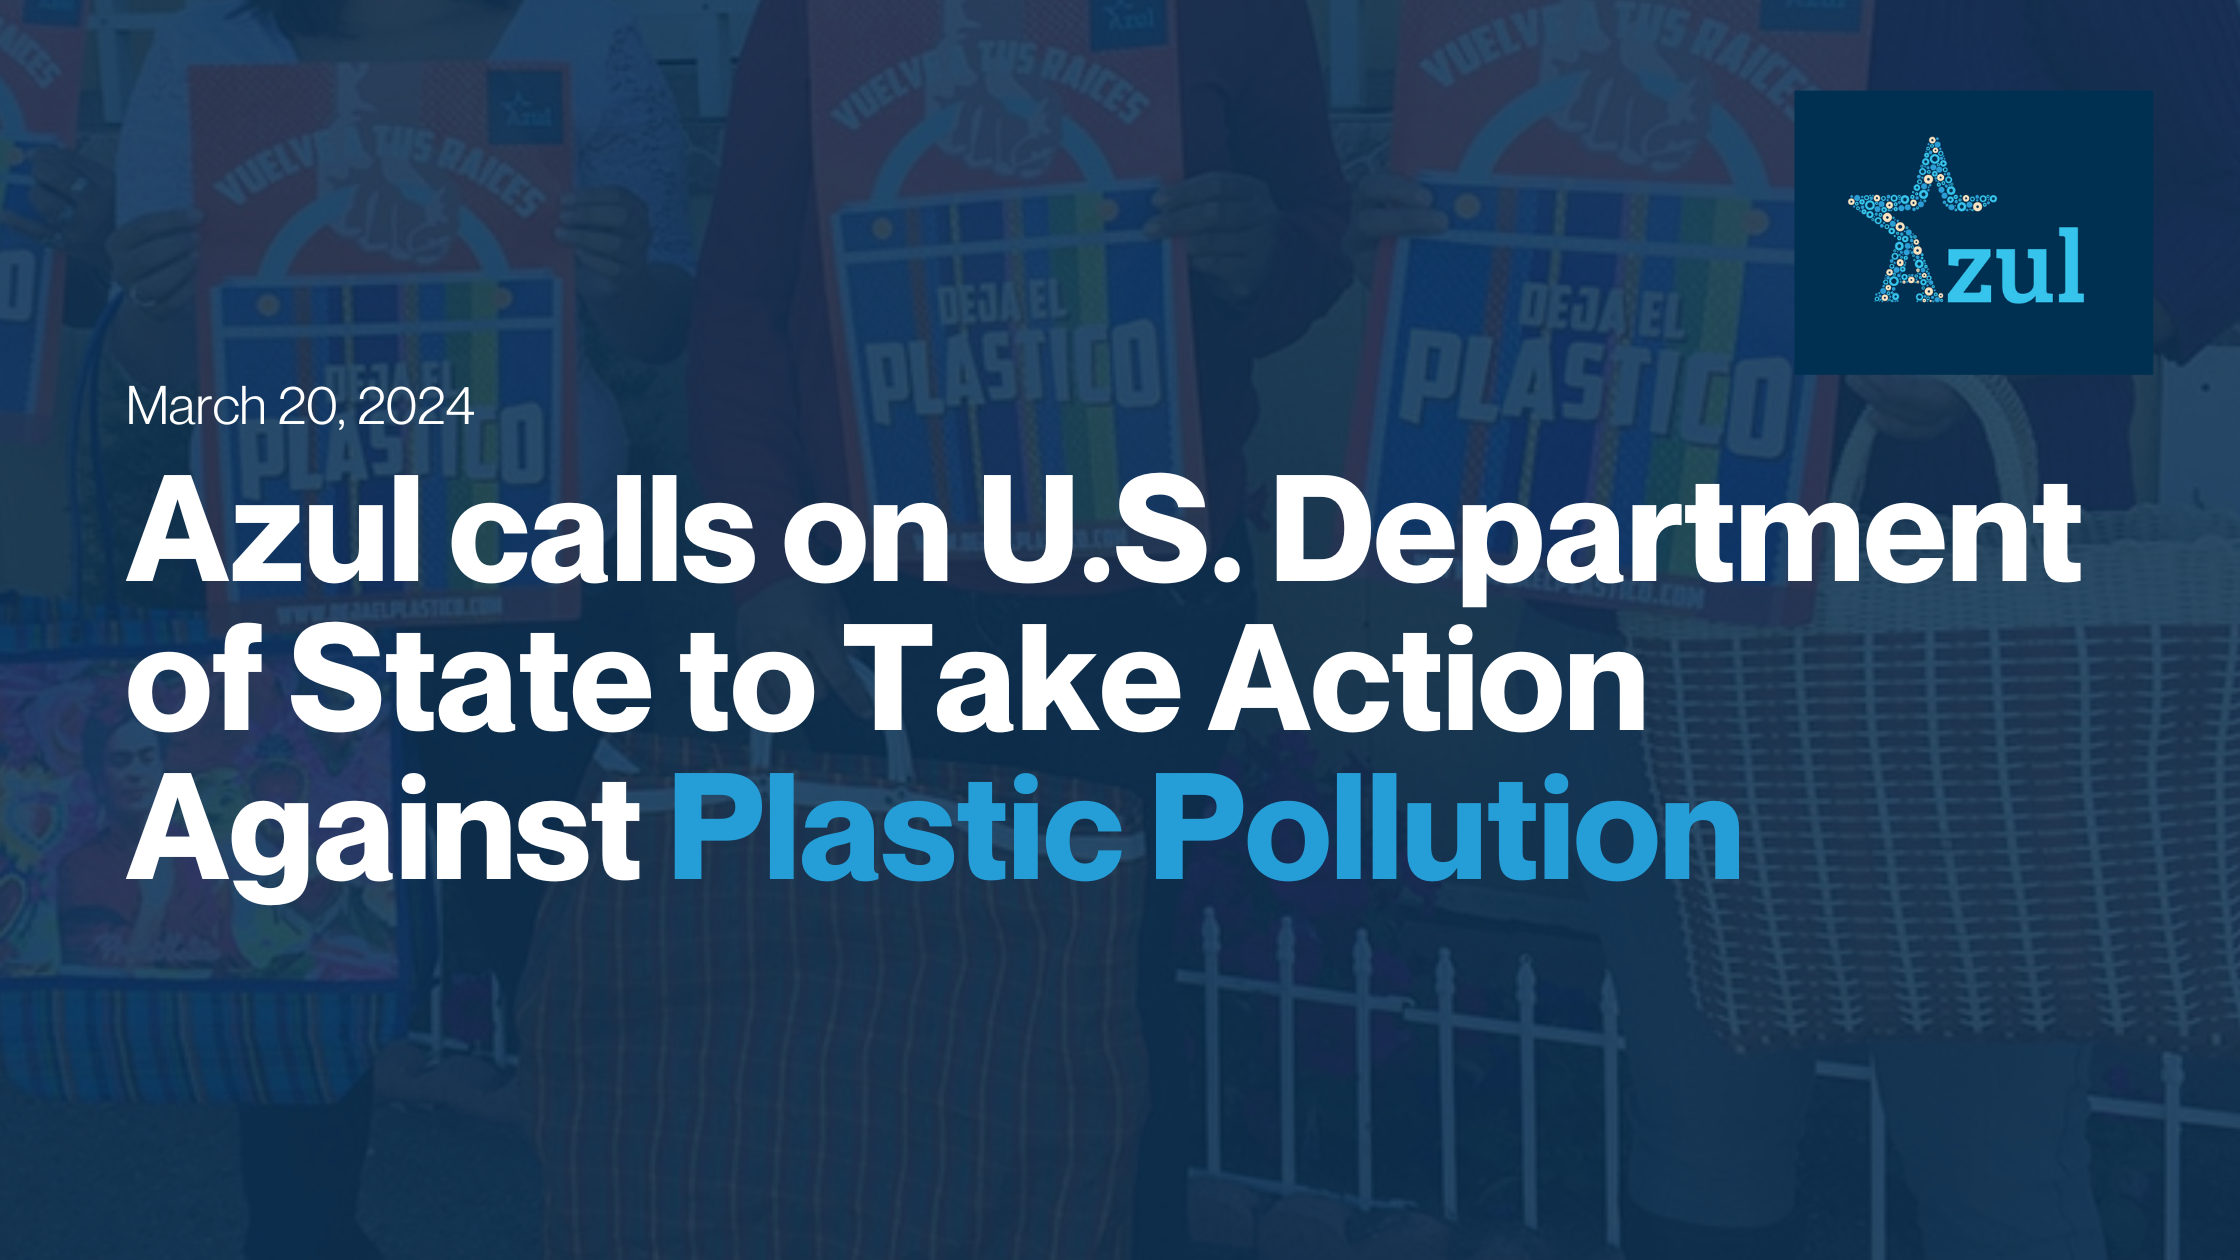 We’re calling on the U.S. Department of State to #DejaElPlástico